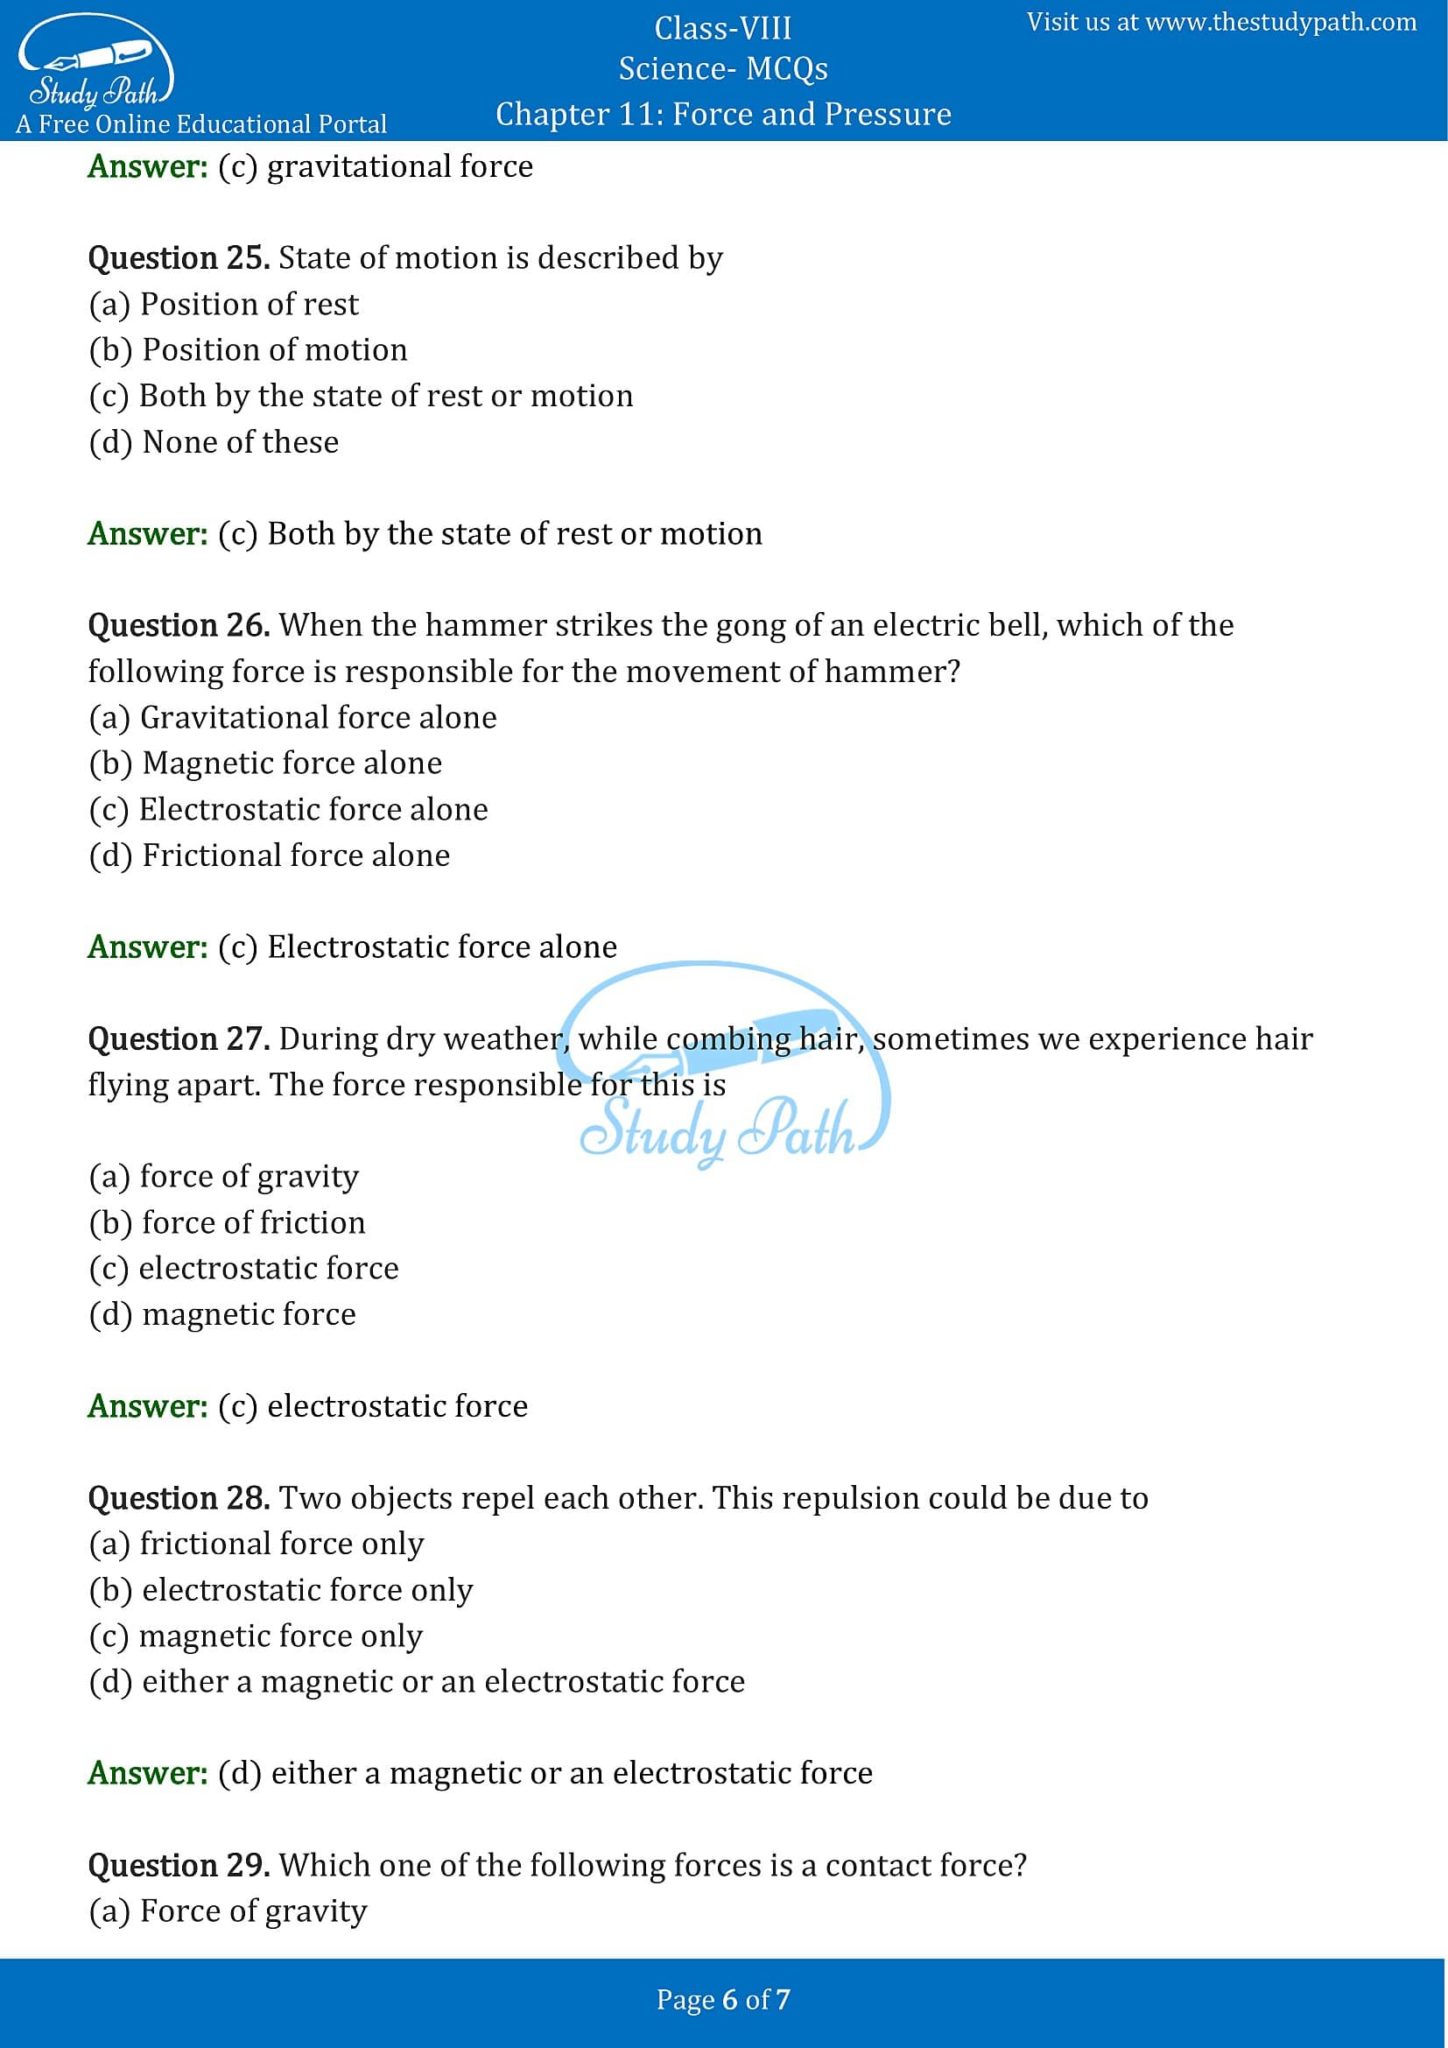 case study questions class 8 science chapter 11